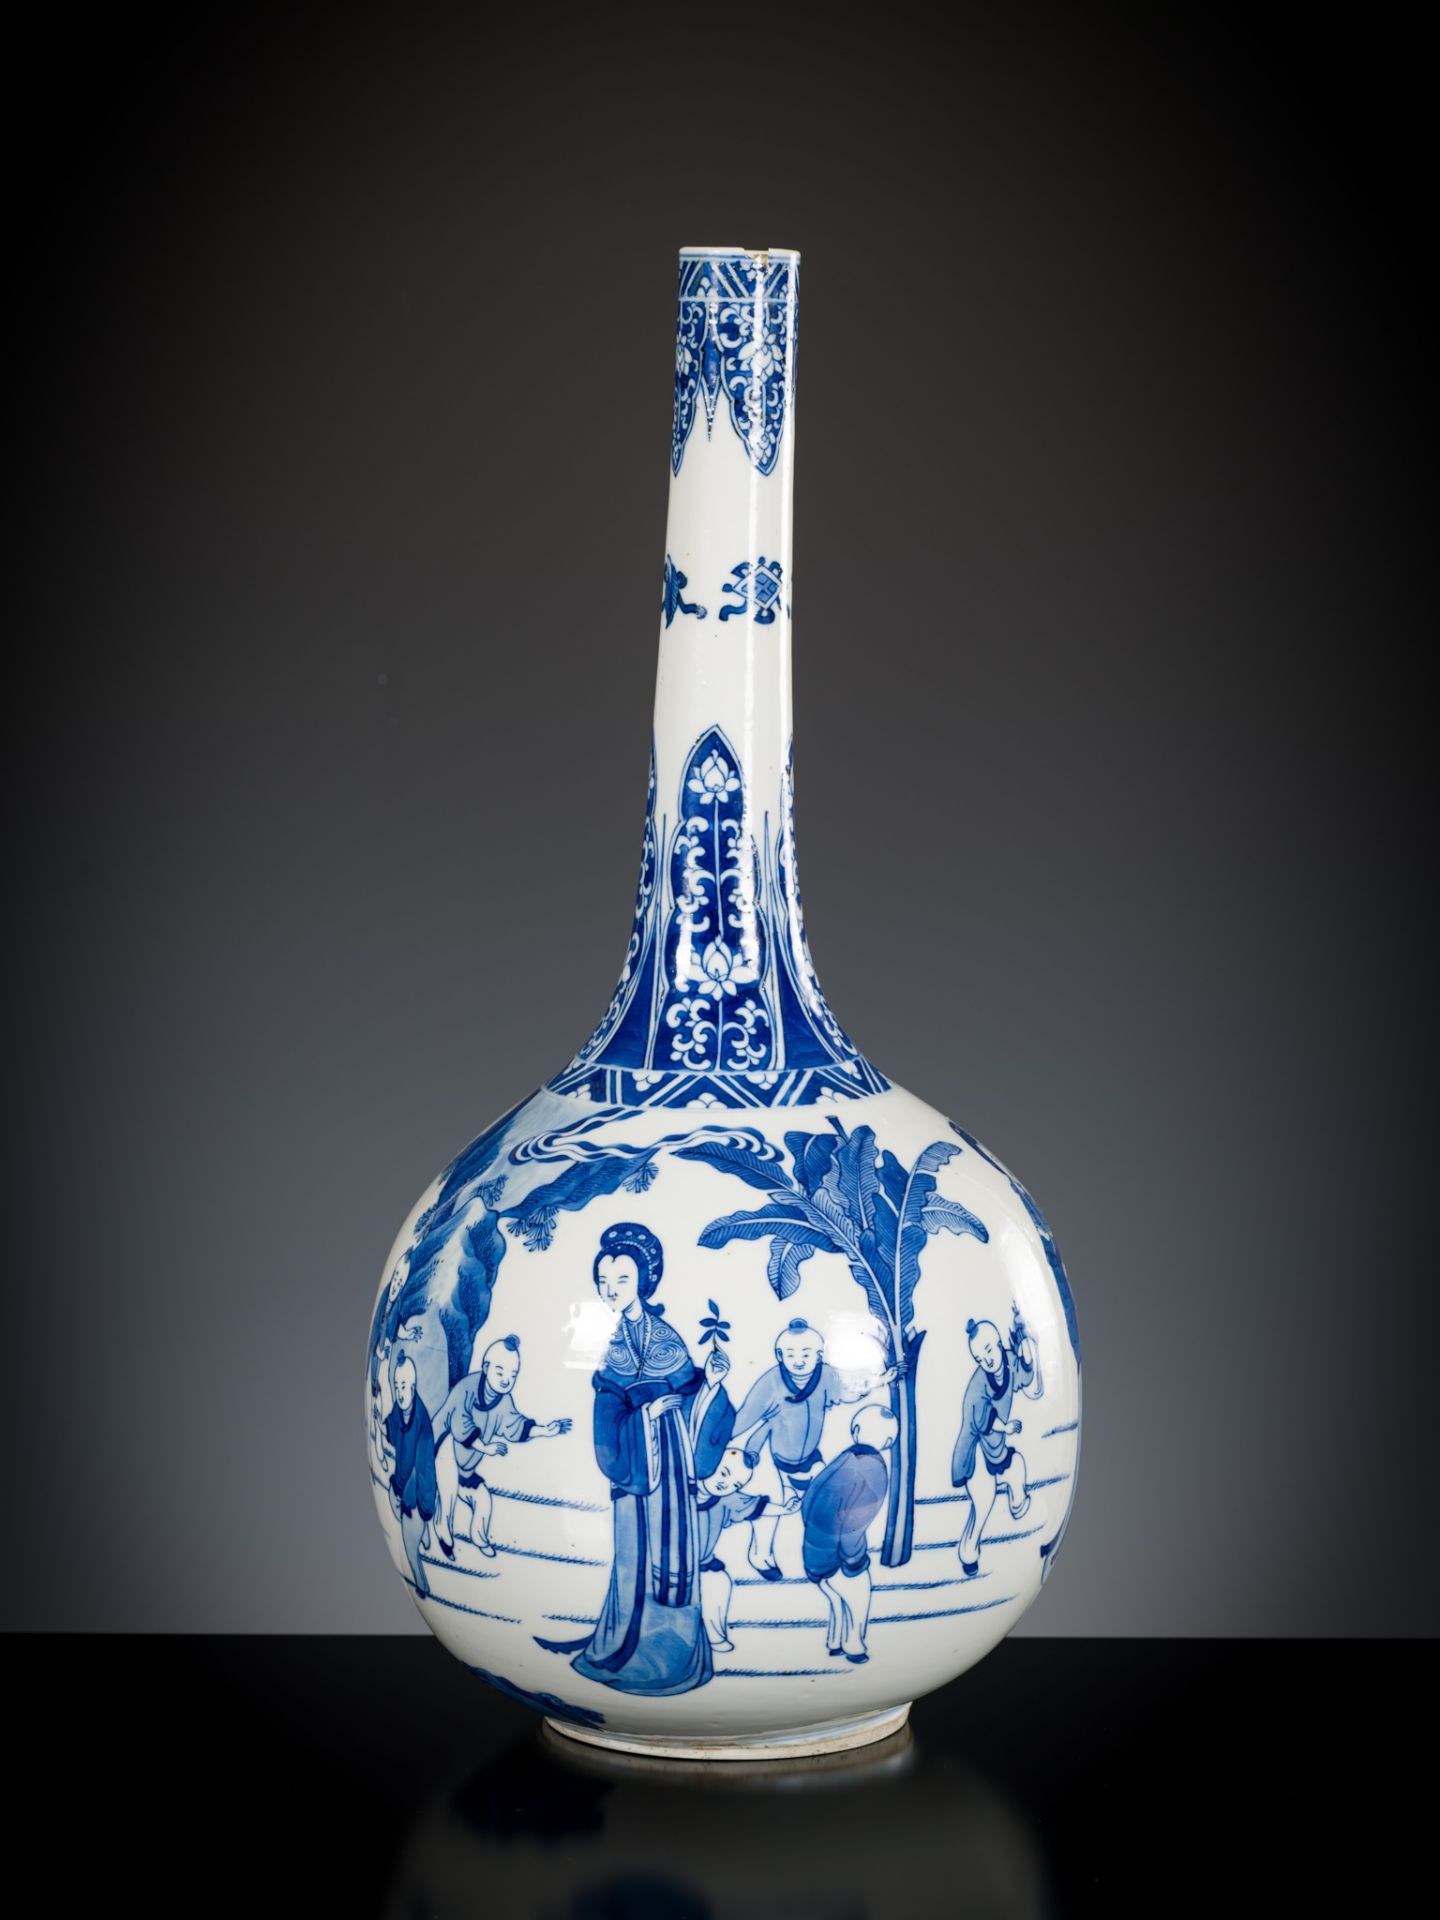 A LARGE BLUE AND WHITE 'PLAYING DISCIPLES' BOTTLE VASE, CHINA, 18th - 19th CENTURY - Image 8 of 9